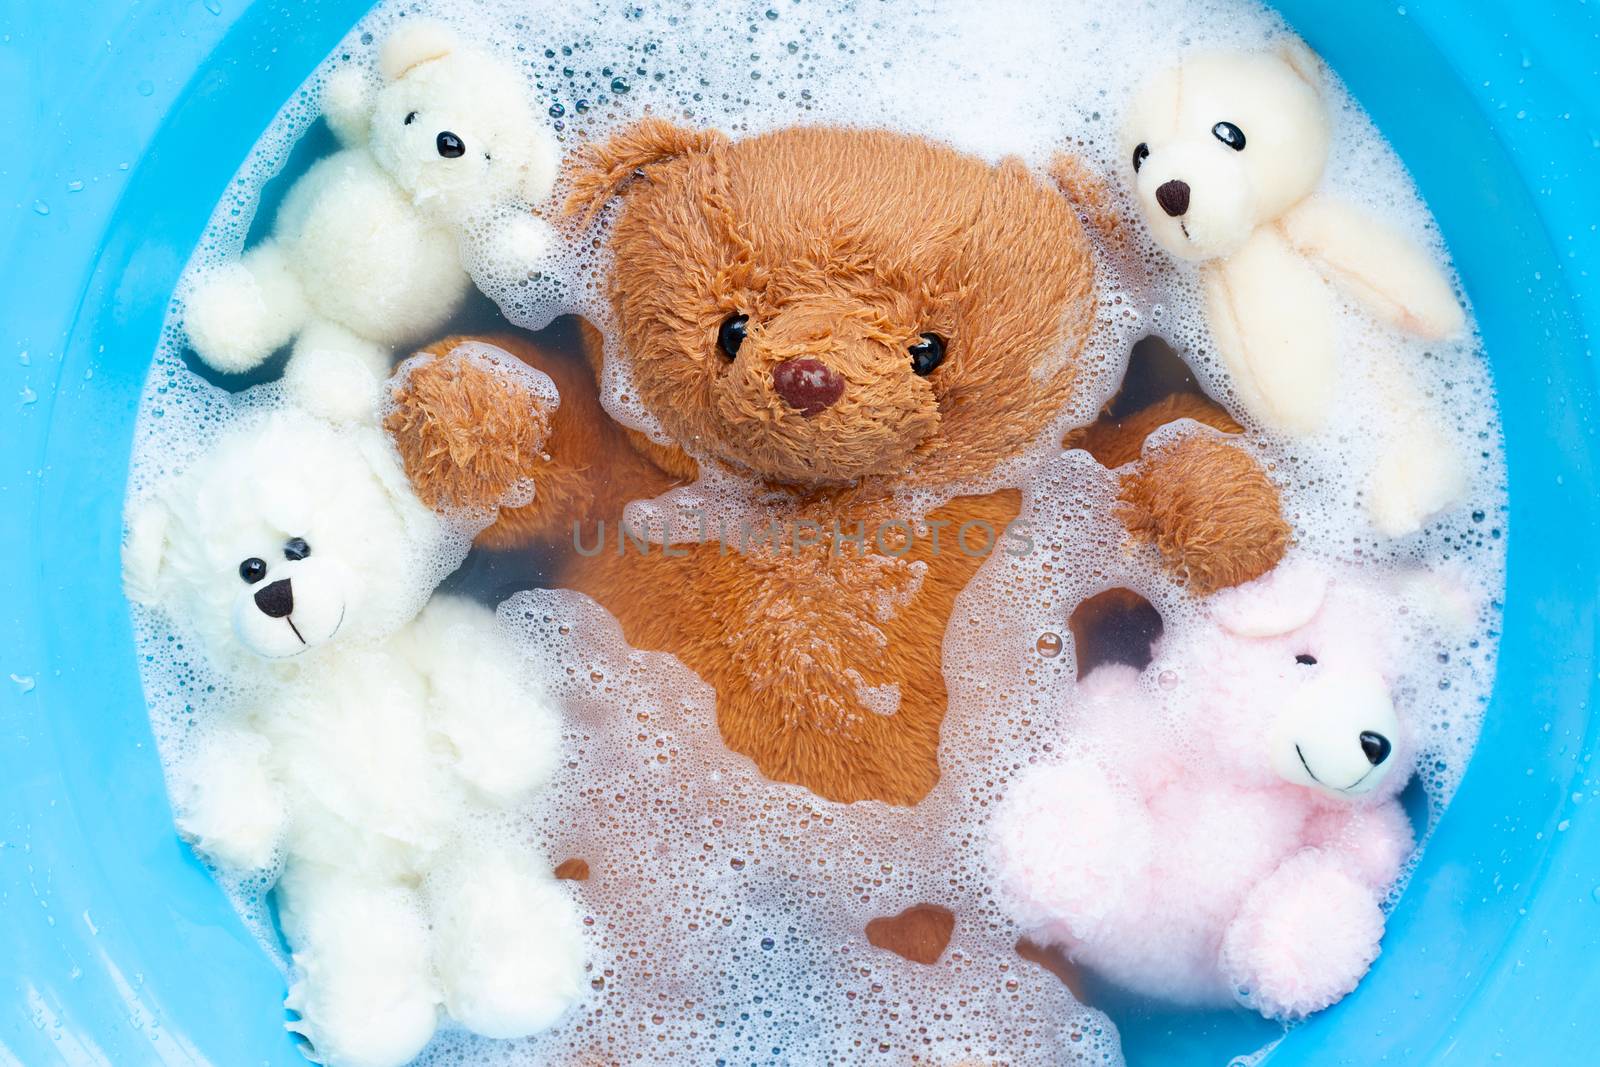 Soak toy bears in laundry detergent water dissolution before was by Bowonpat